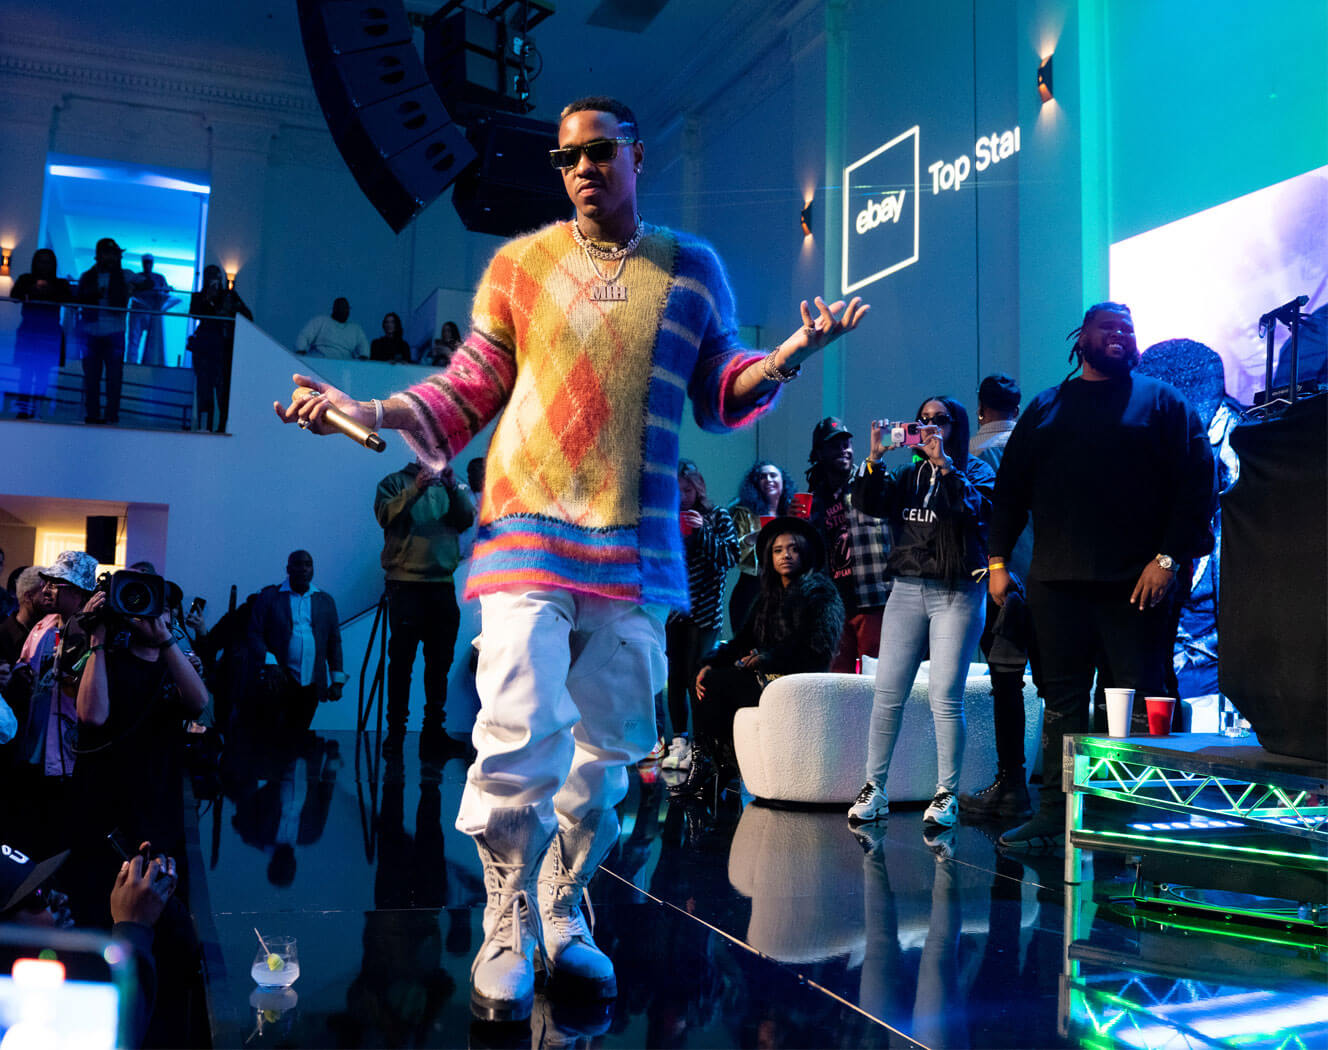 eBay Top Star holds exclusive events for their members such as the ComplexCon Afterparty in 2022 with artist Jeremih delivering a private performance for Top Star Members